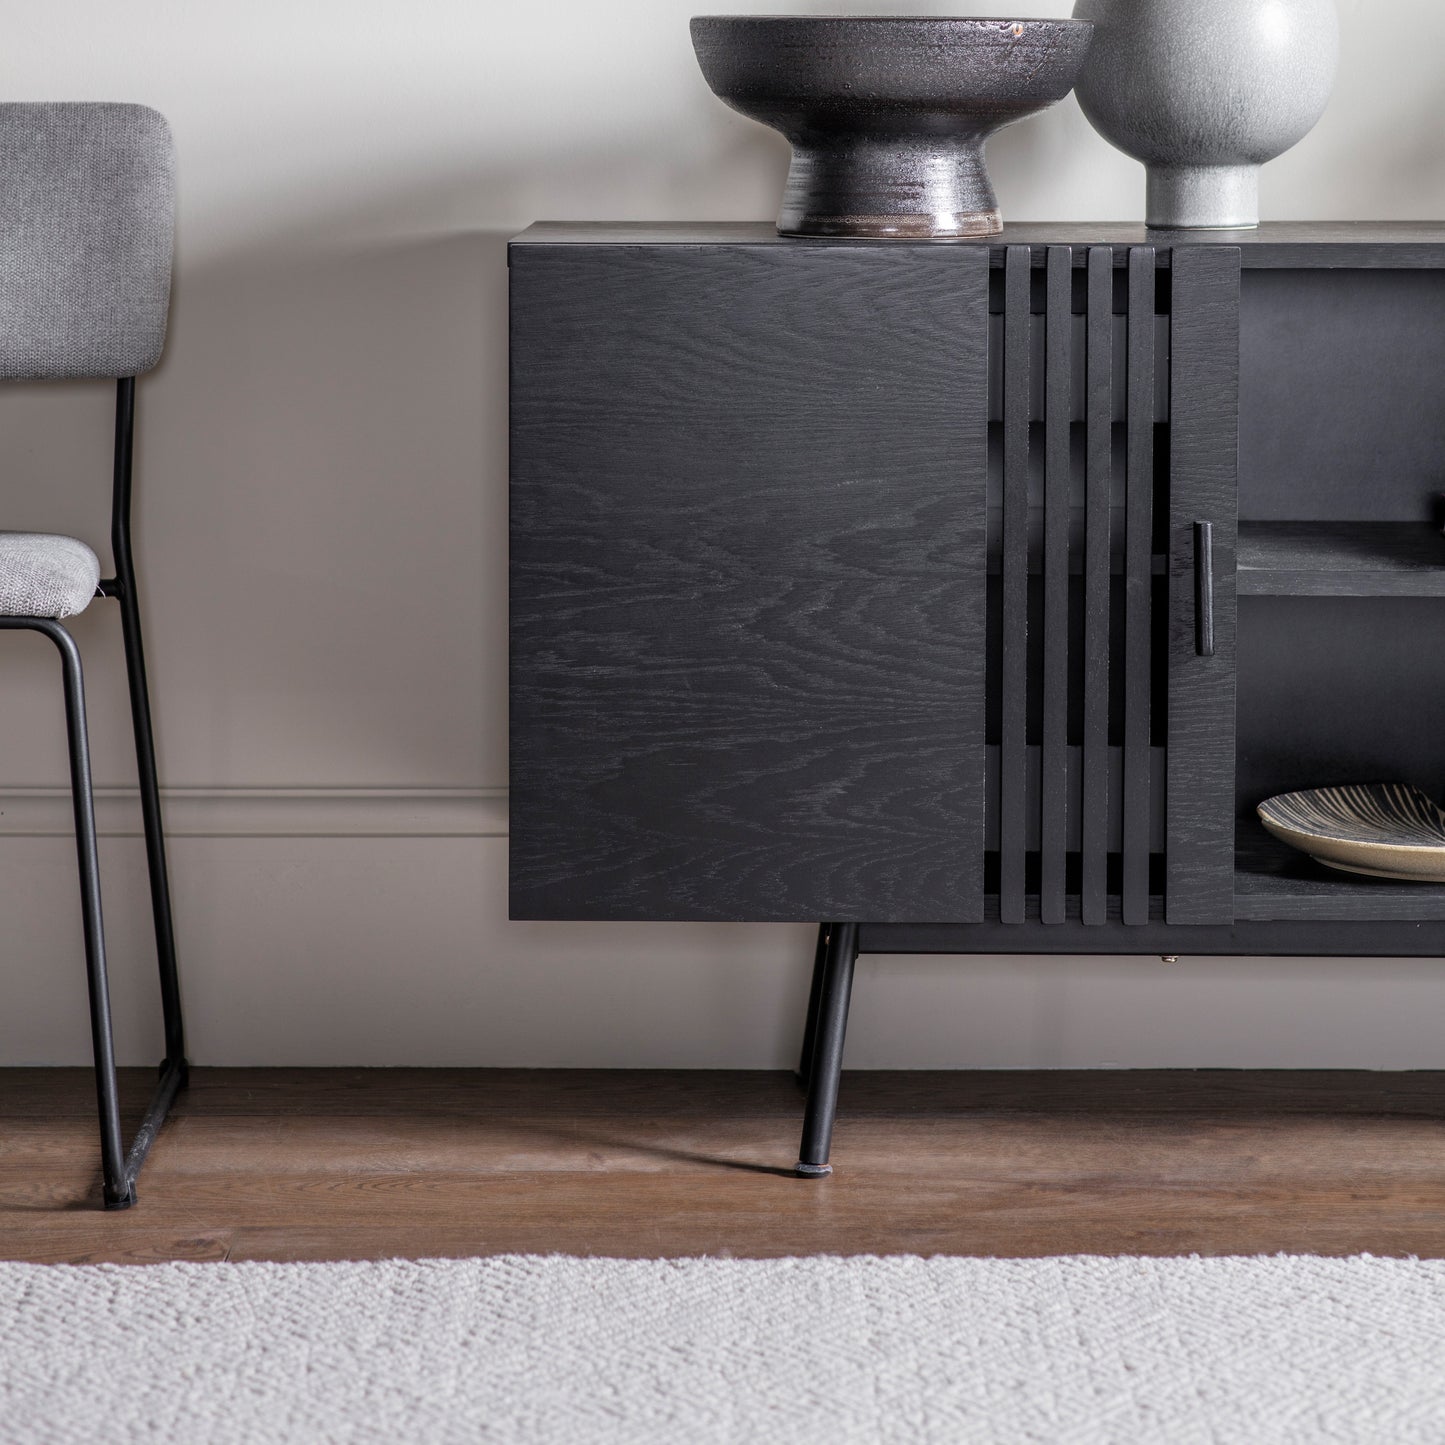 A Holston Sideboard and black chair, perfect for interior decor and home furniture.